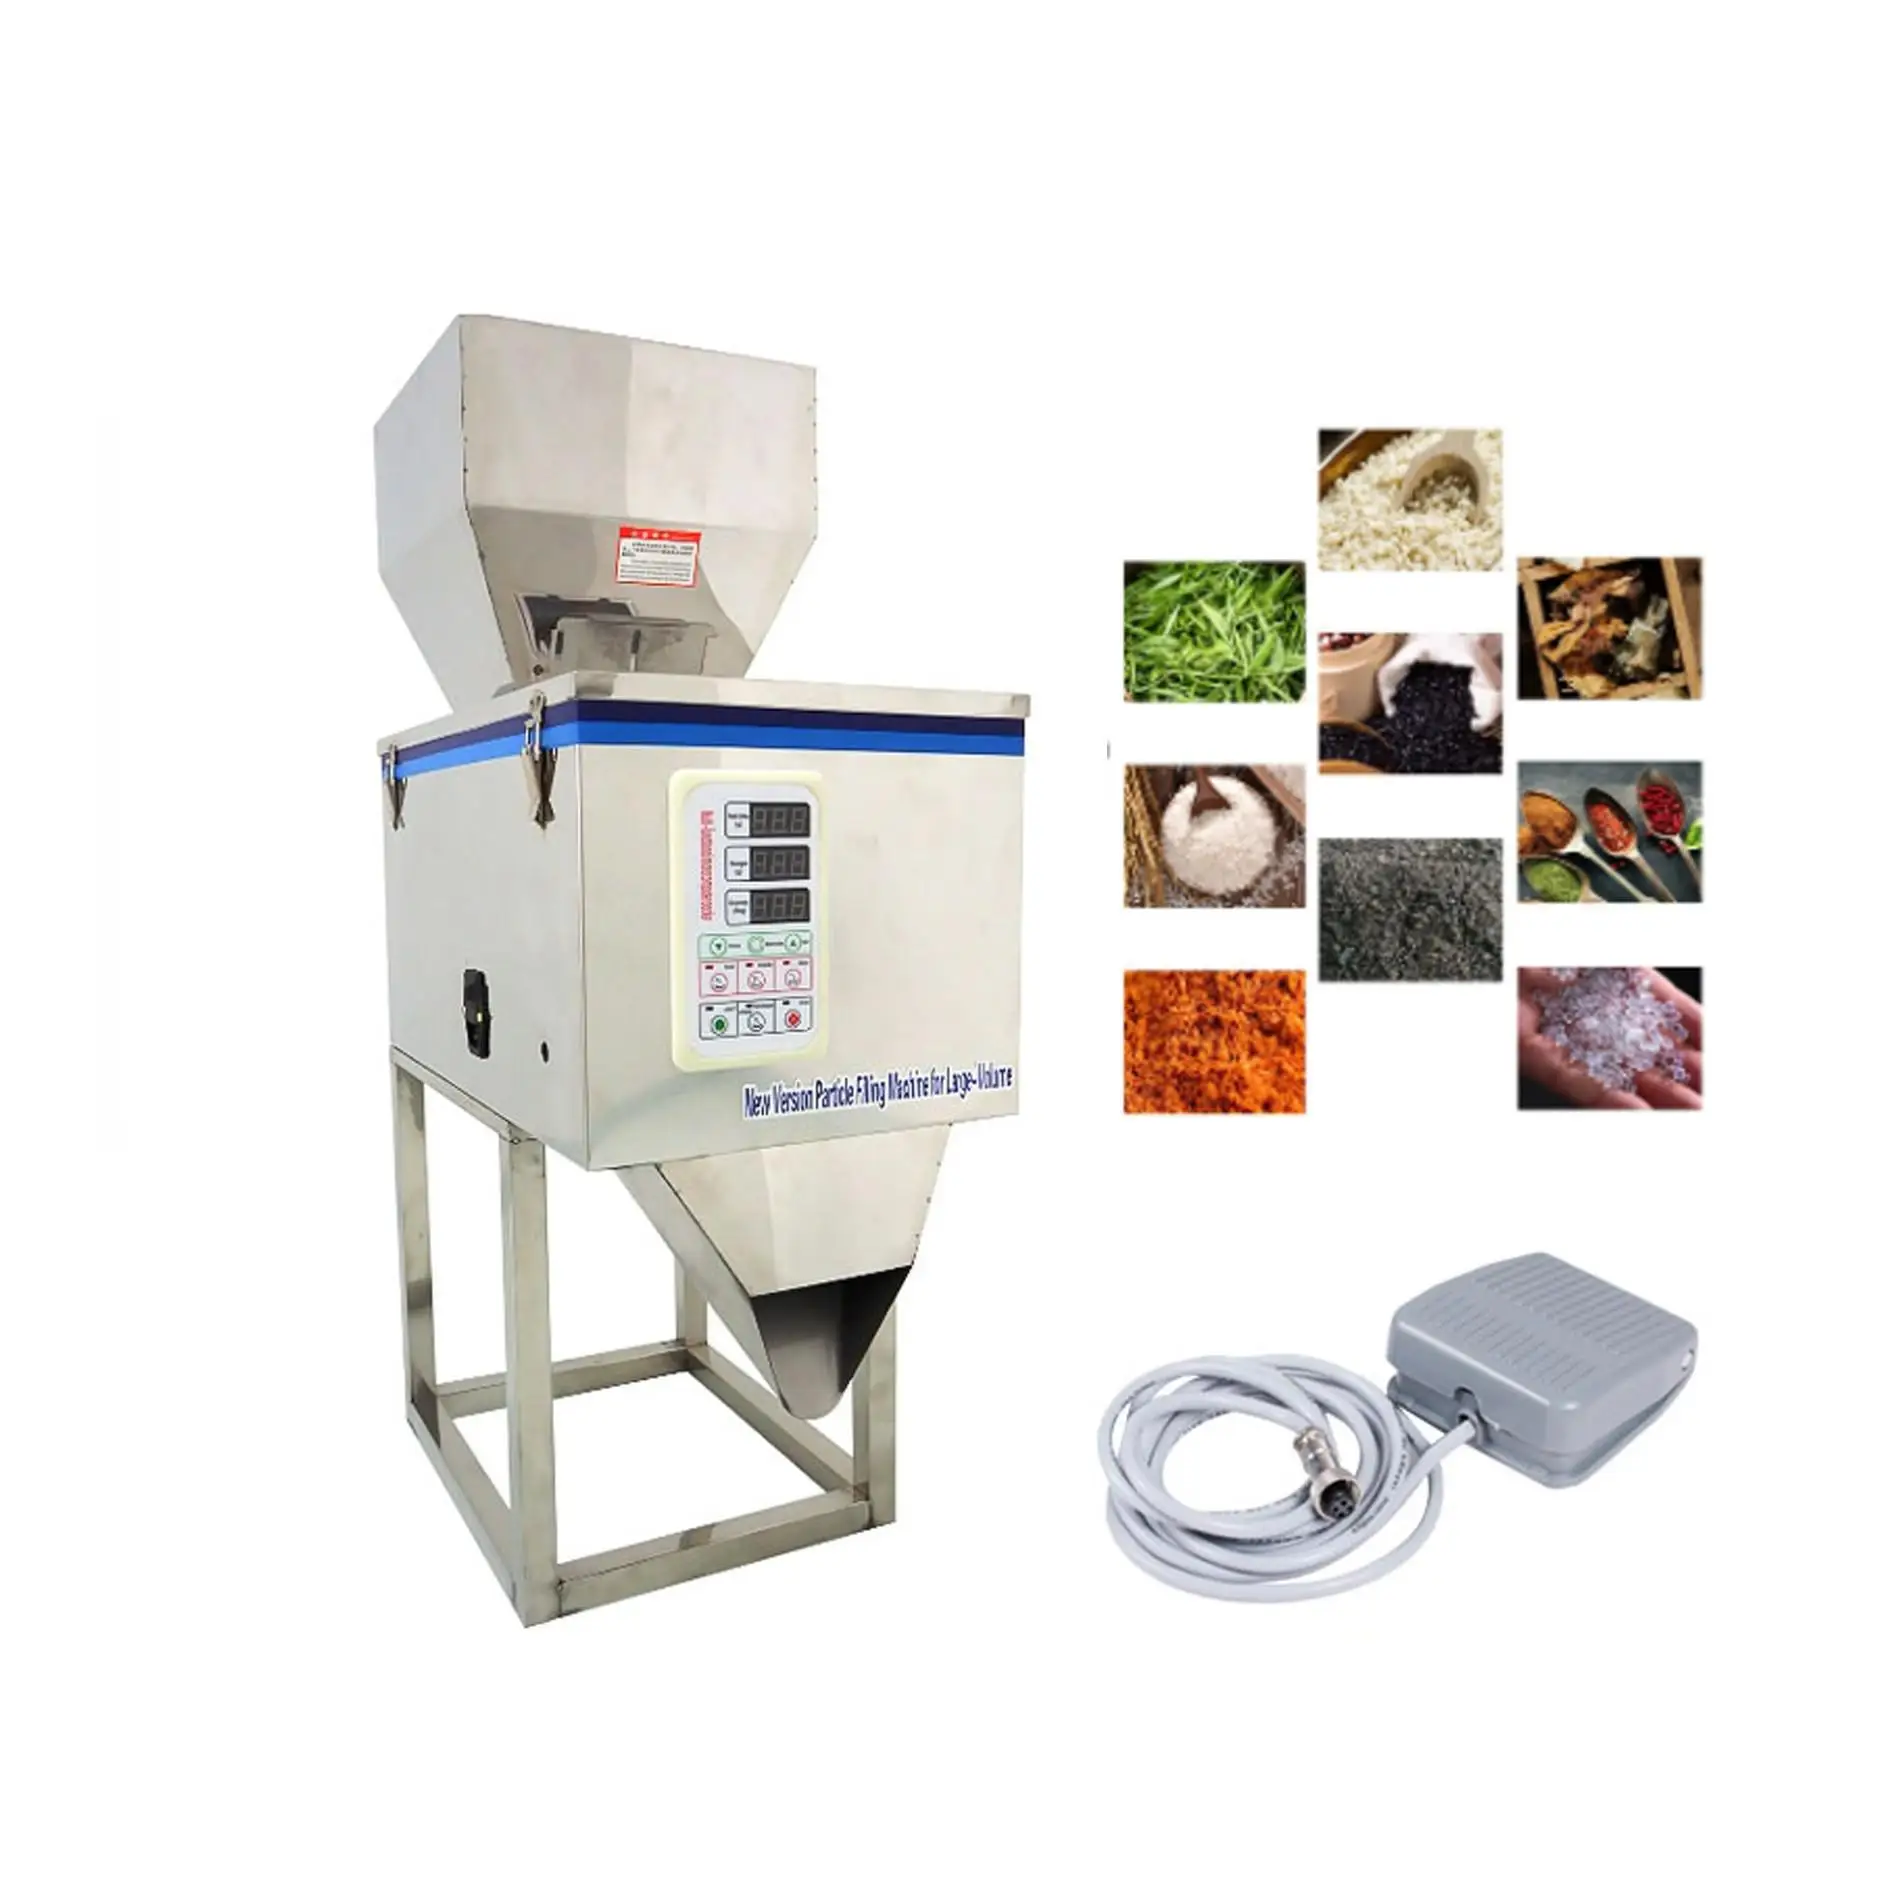 

20-999g Particle Filling Machine Doser Granule Powder Filler Weighing Machine Tea Leaf Packing Device Free Shipping